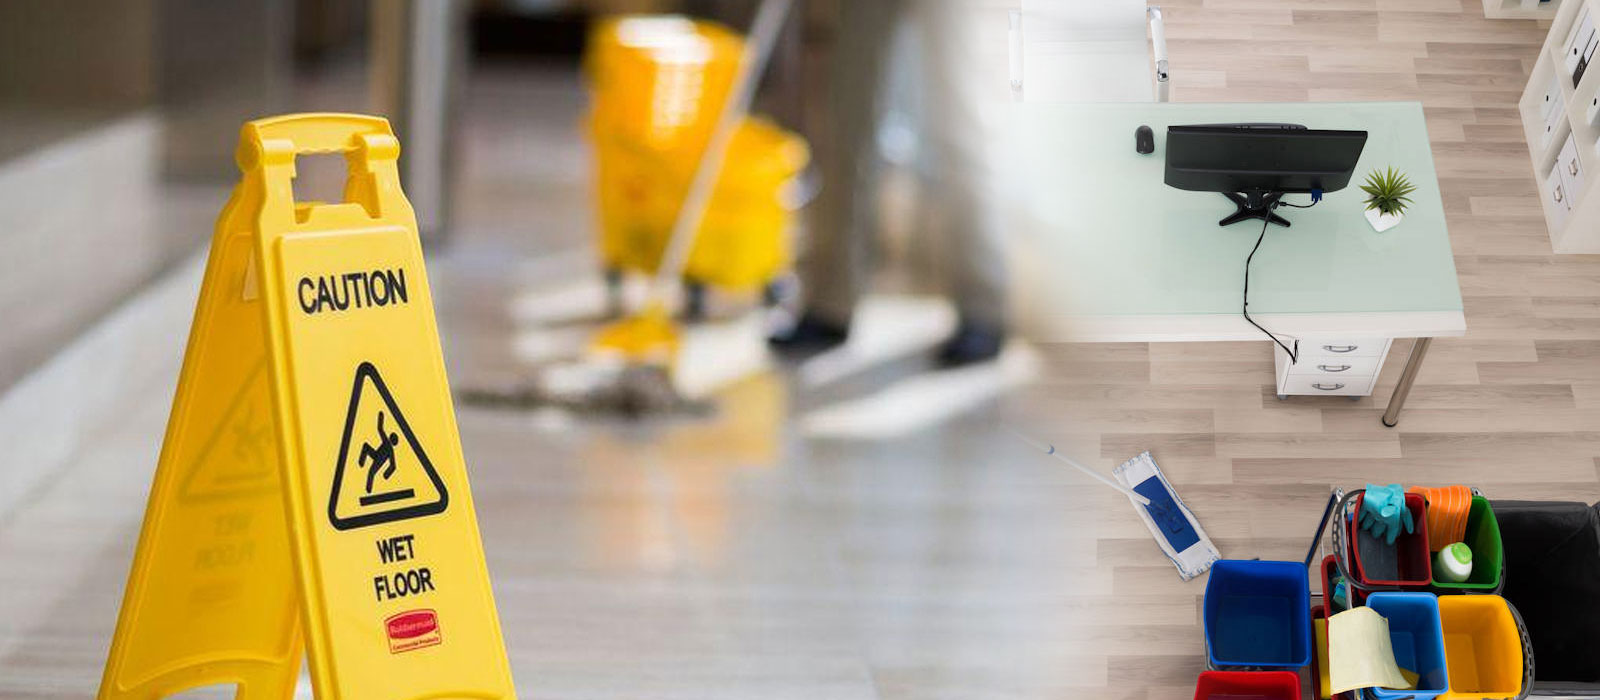 contract-cleaning-services-commercial-retail-ccs-cleaning